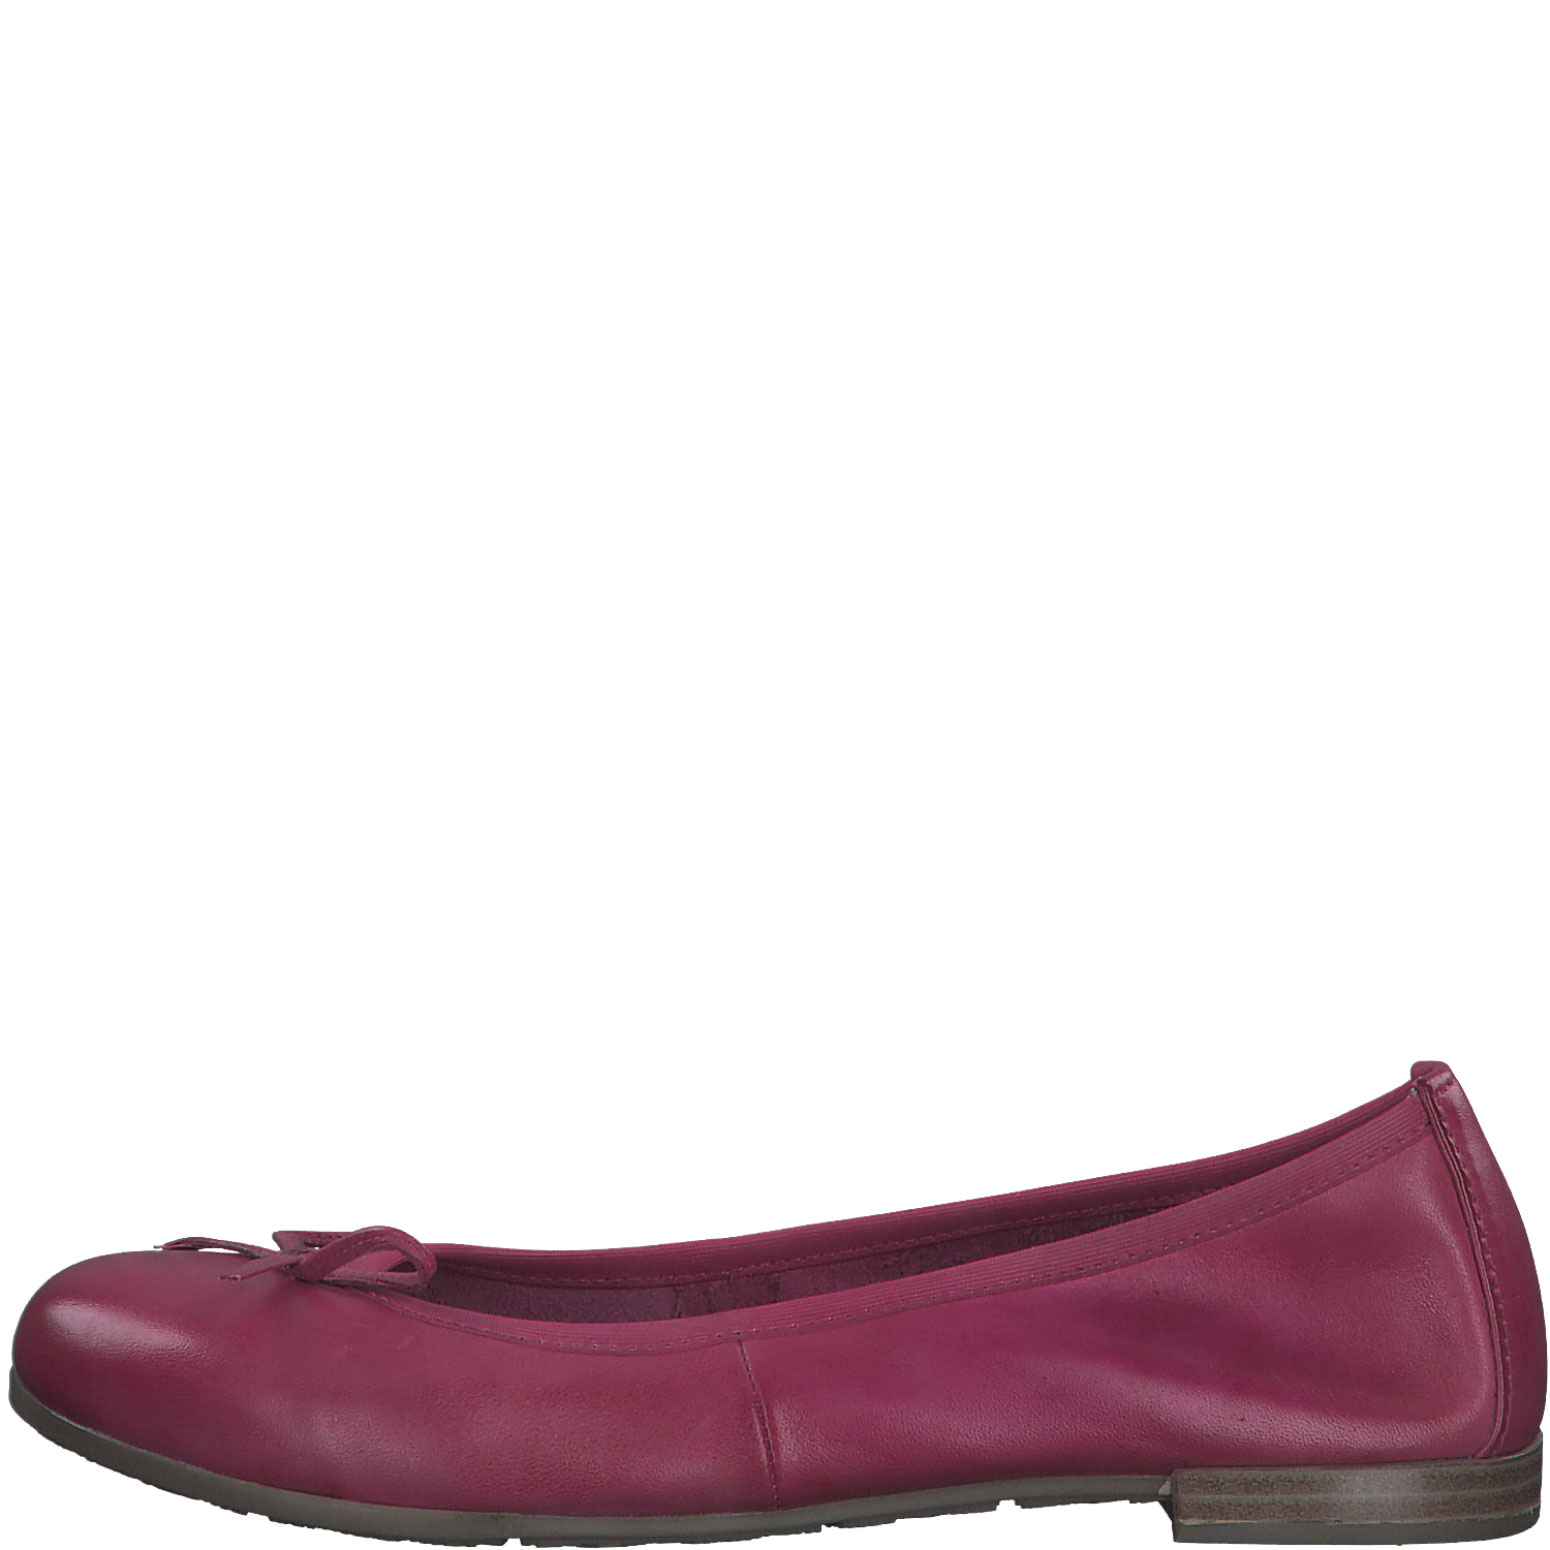 Marco Tozzi Ballerina - Pink smooth leather